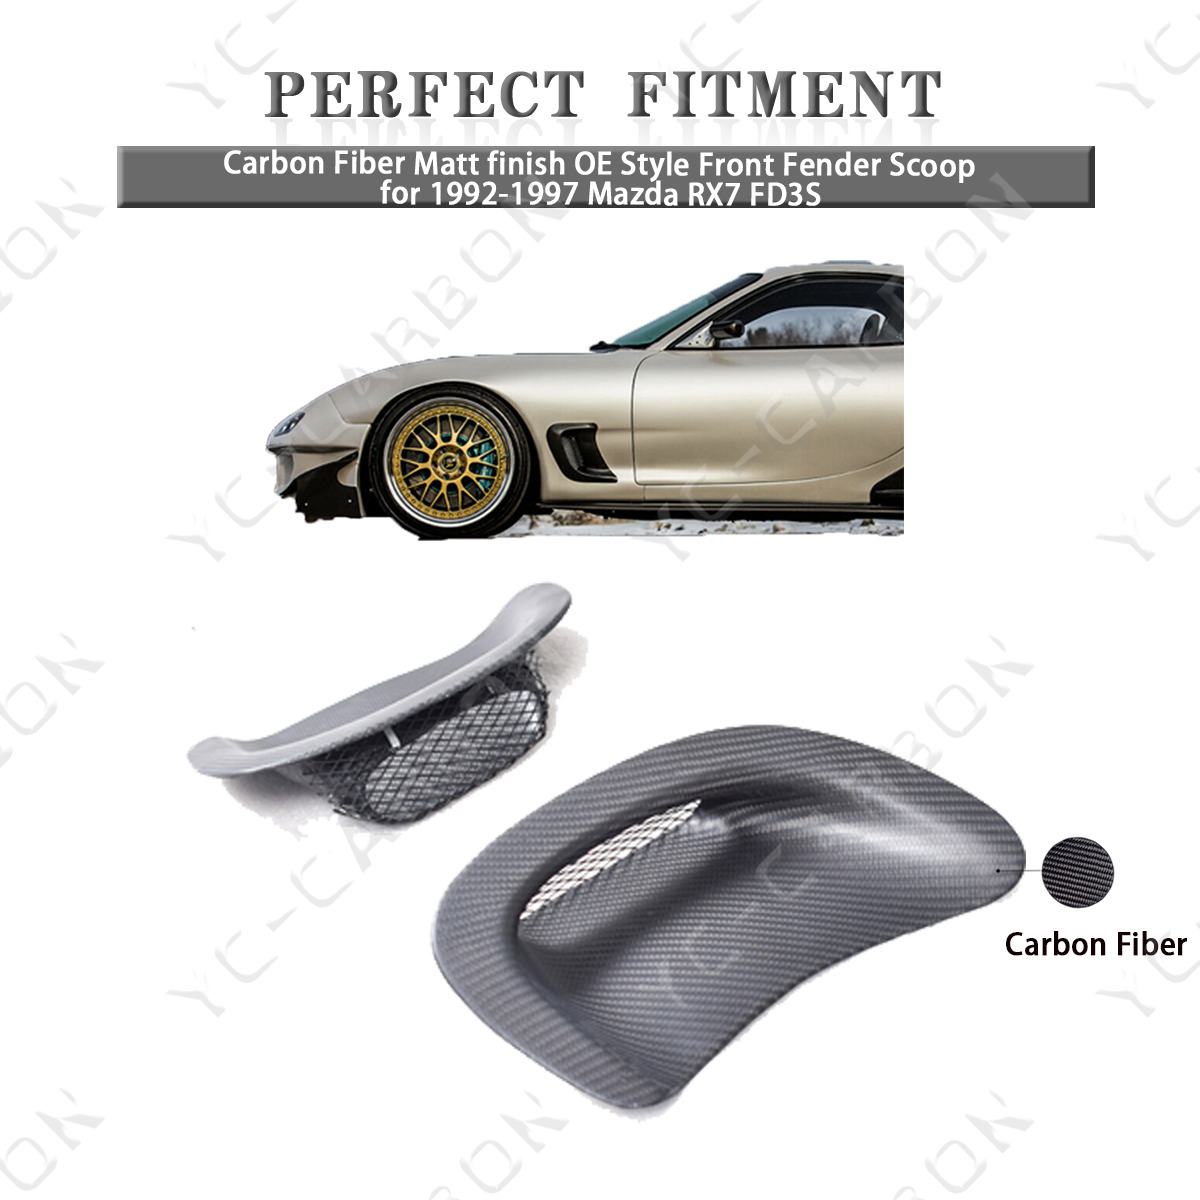 New Carbon Matt finish OE Style Front Fender Scoop for 1992-1997 Mazda RX7 FD3S